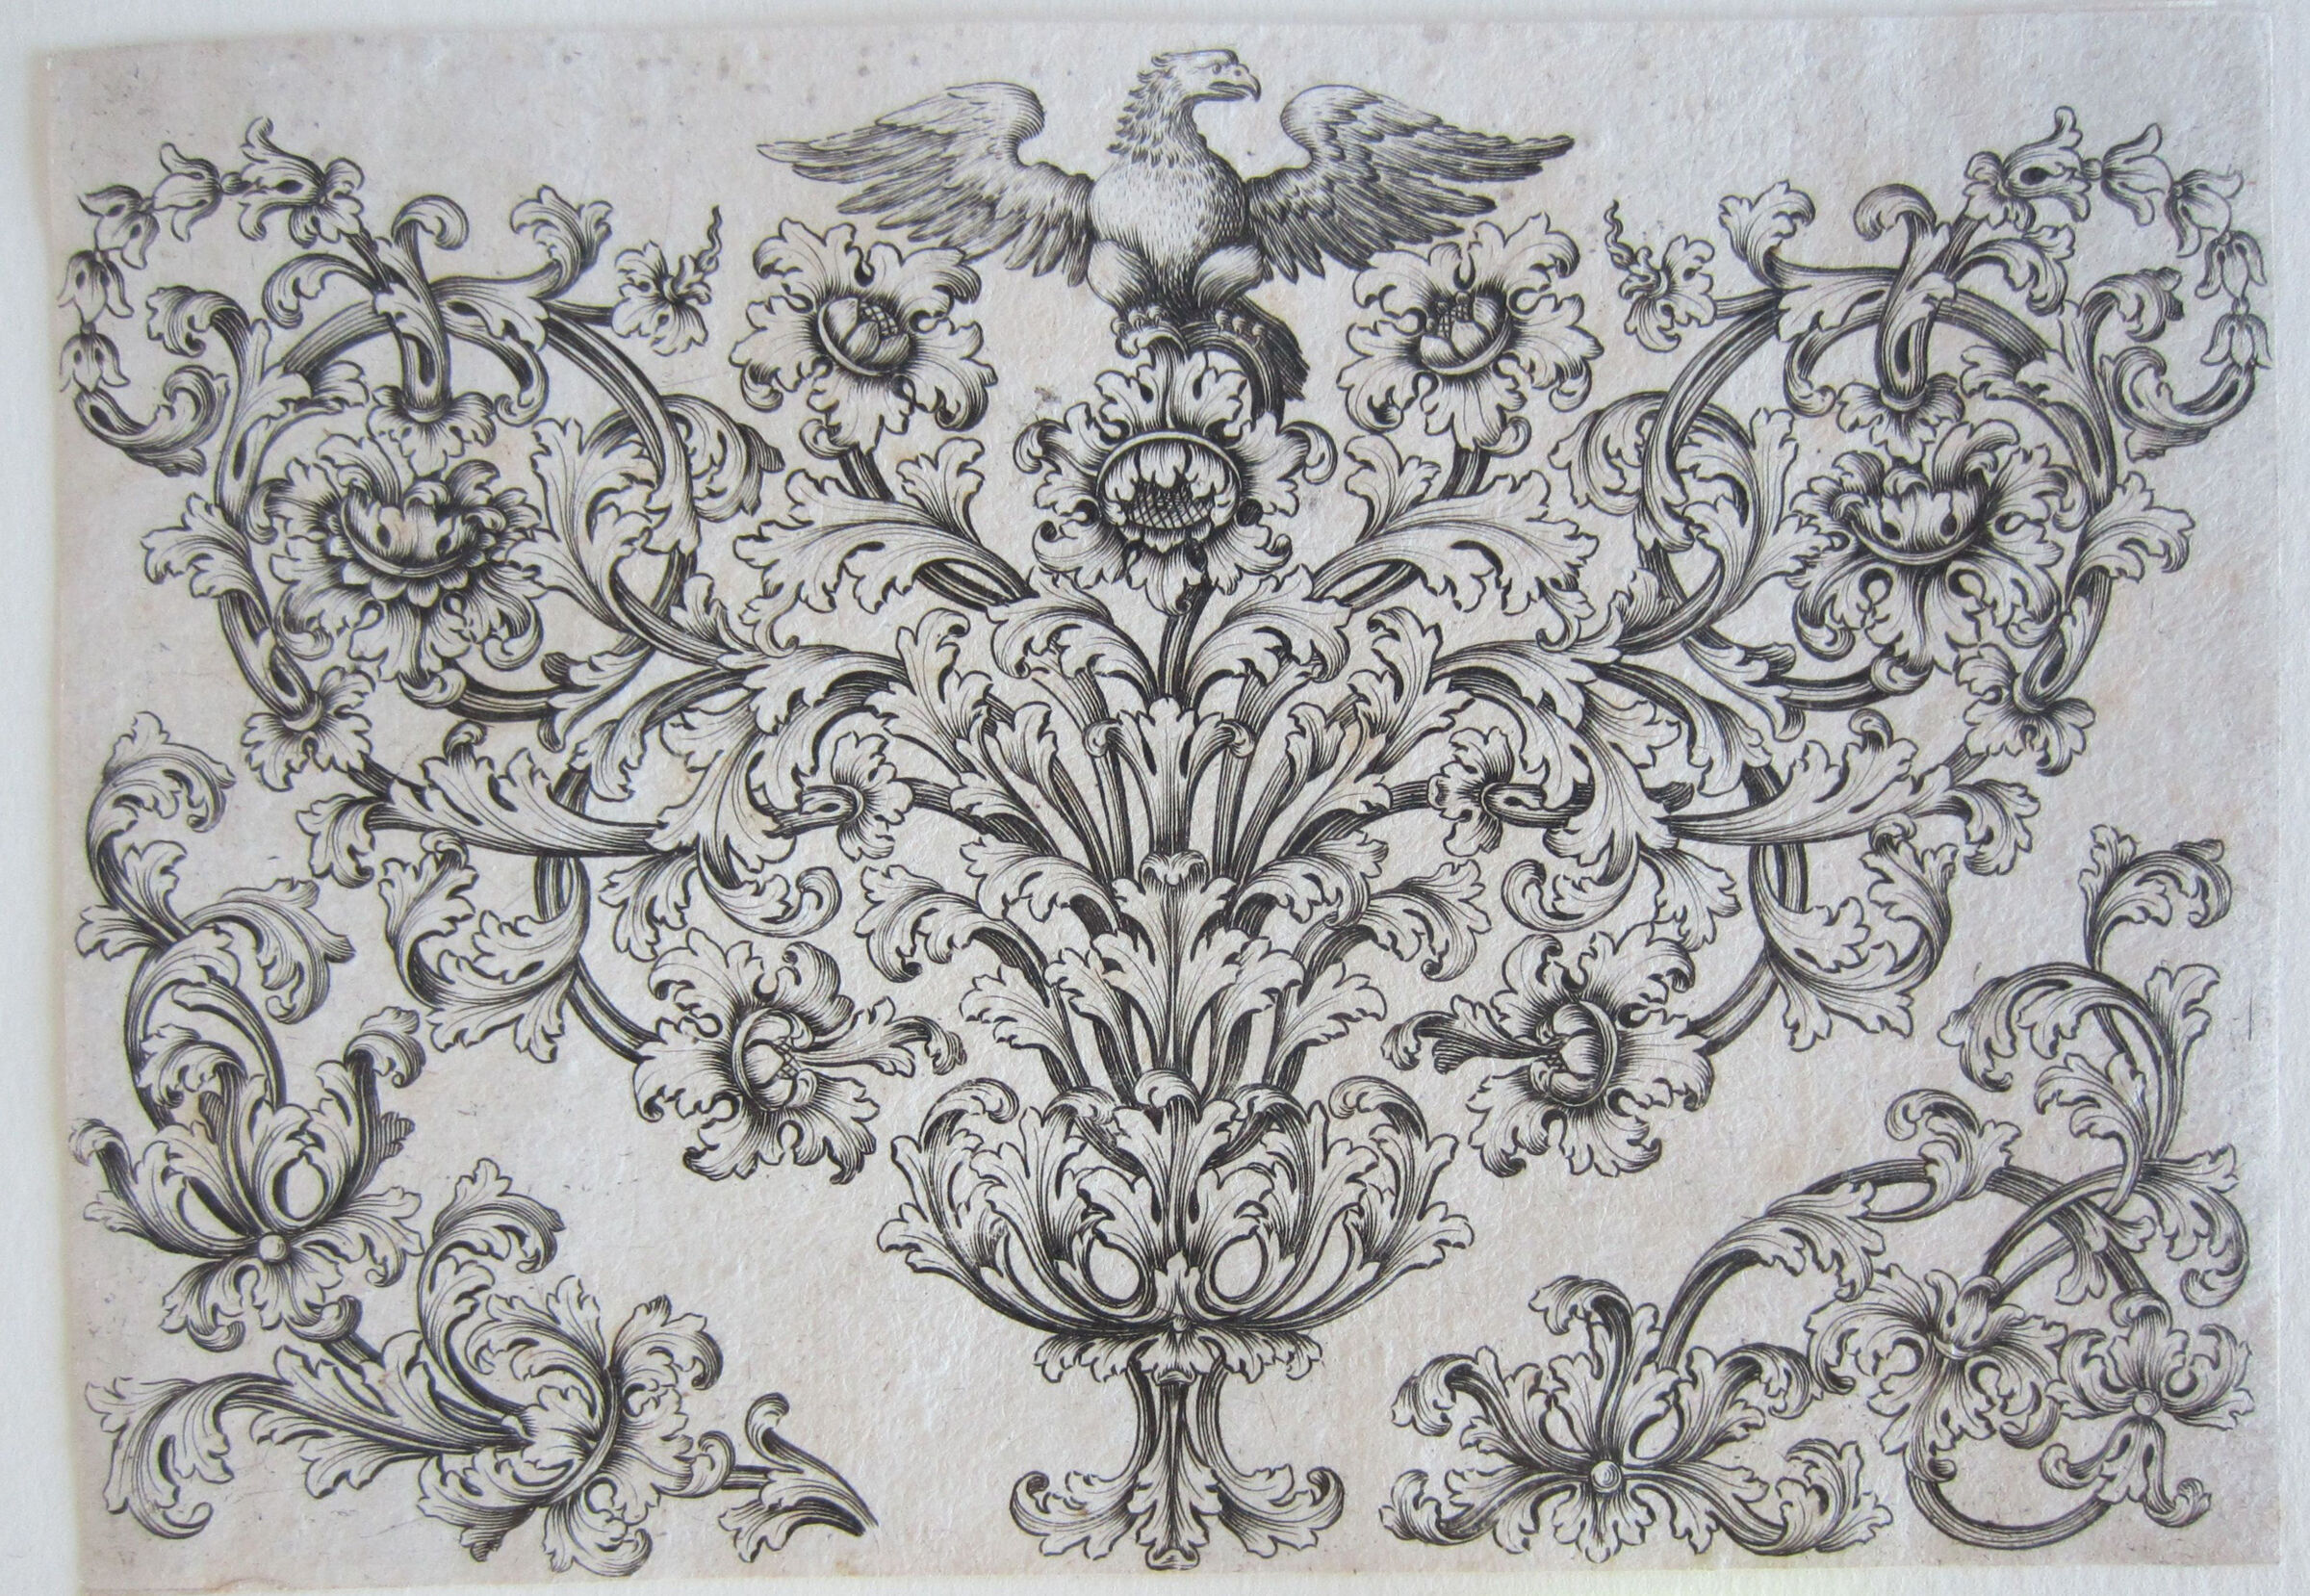 Foliate Design For A Breast Jewel, An Eagle Atop A Blossom On The Tip Of The Larger Motif